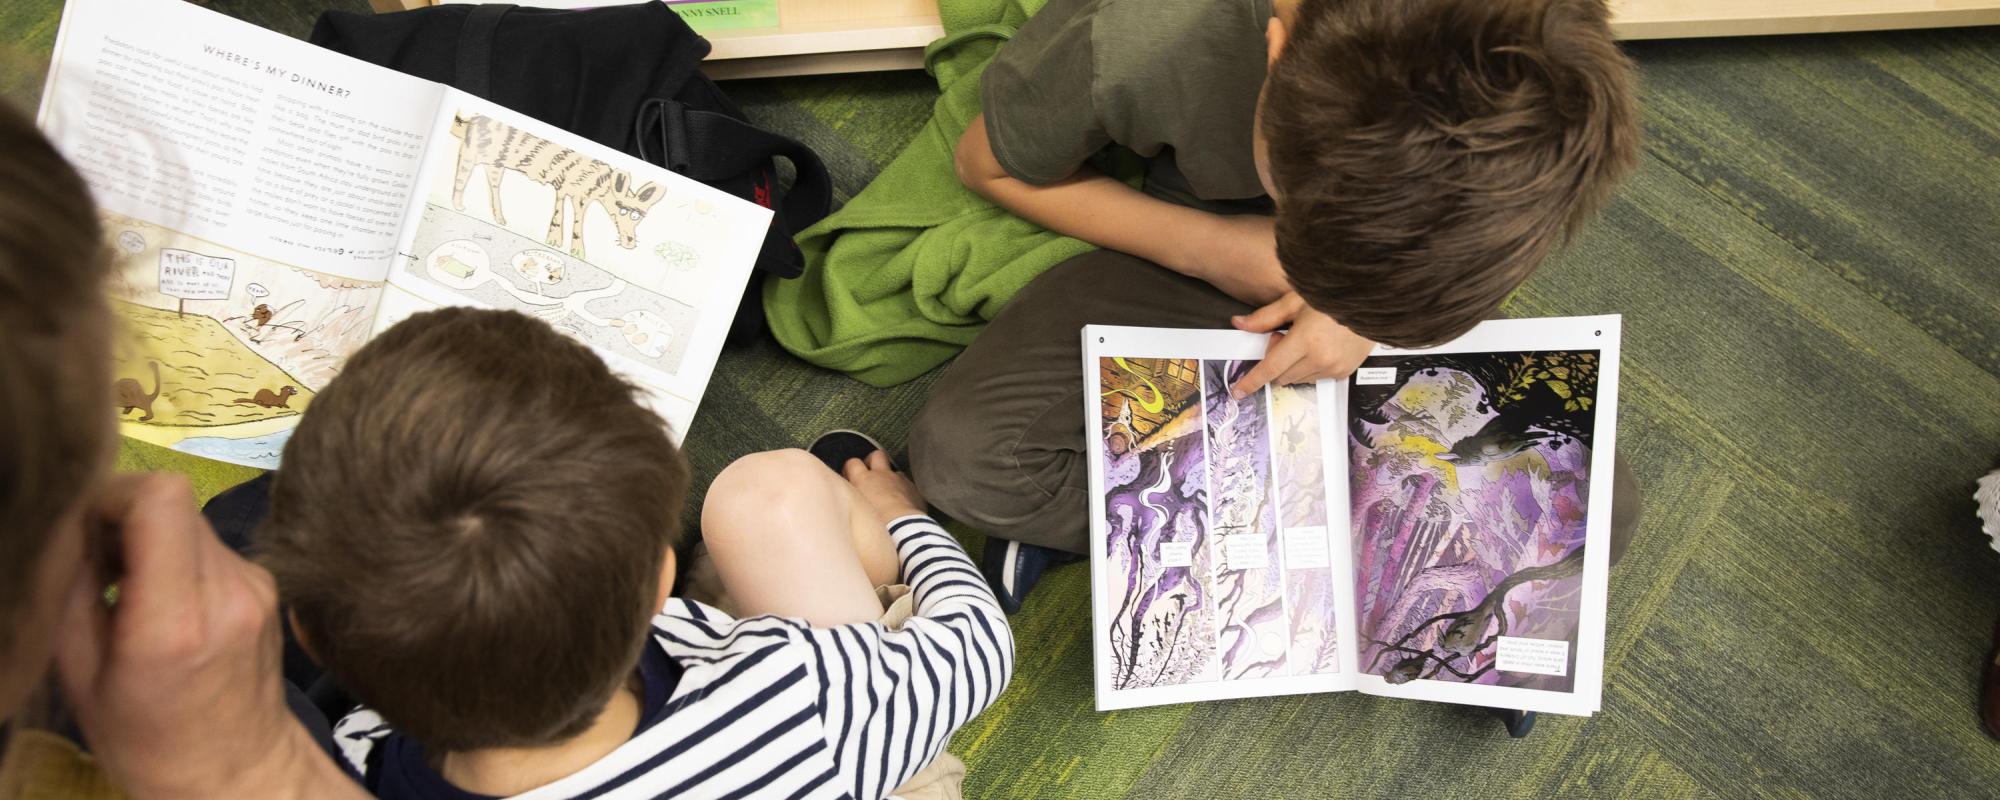 Two children reading books in library